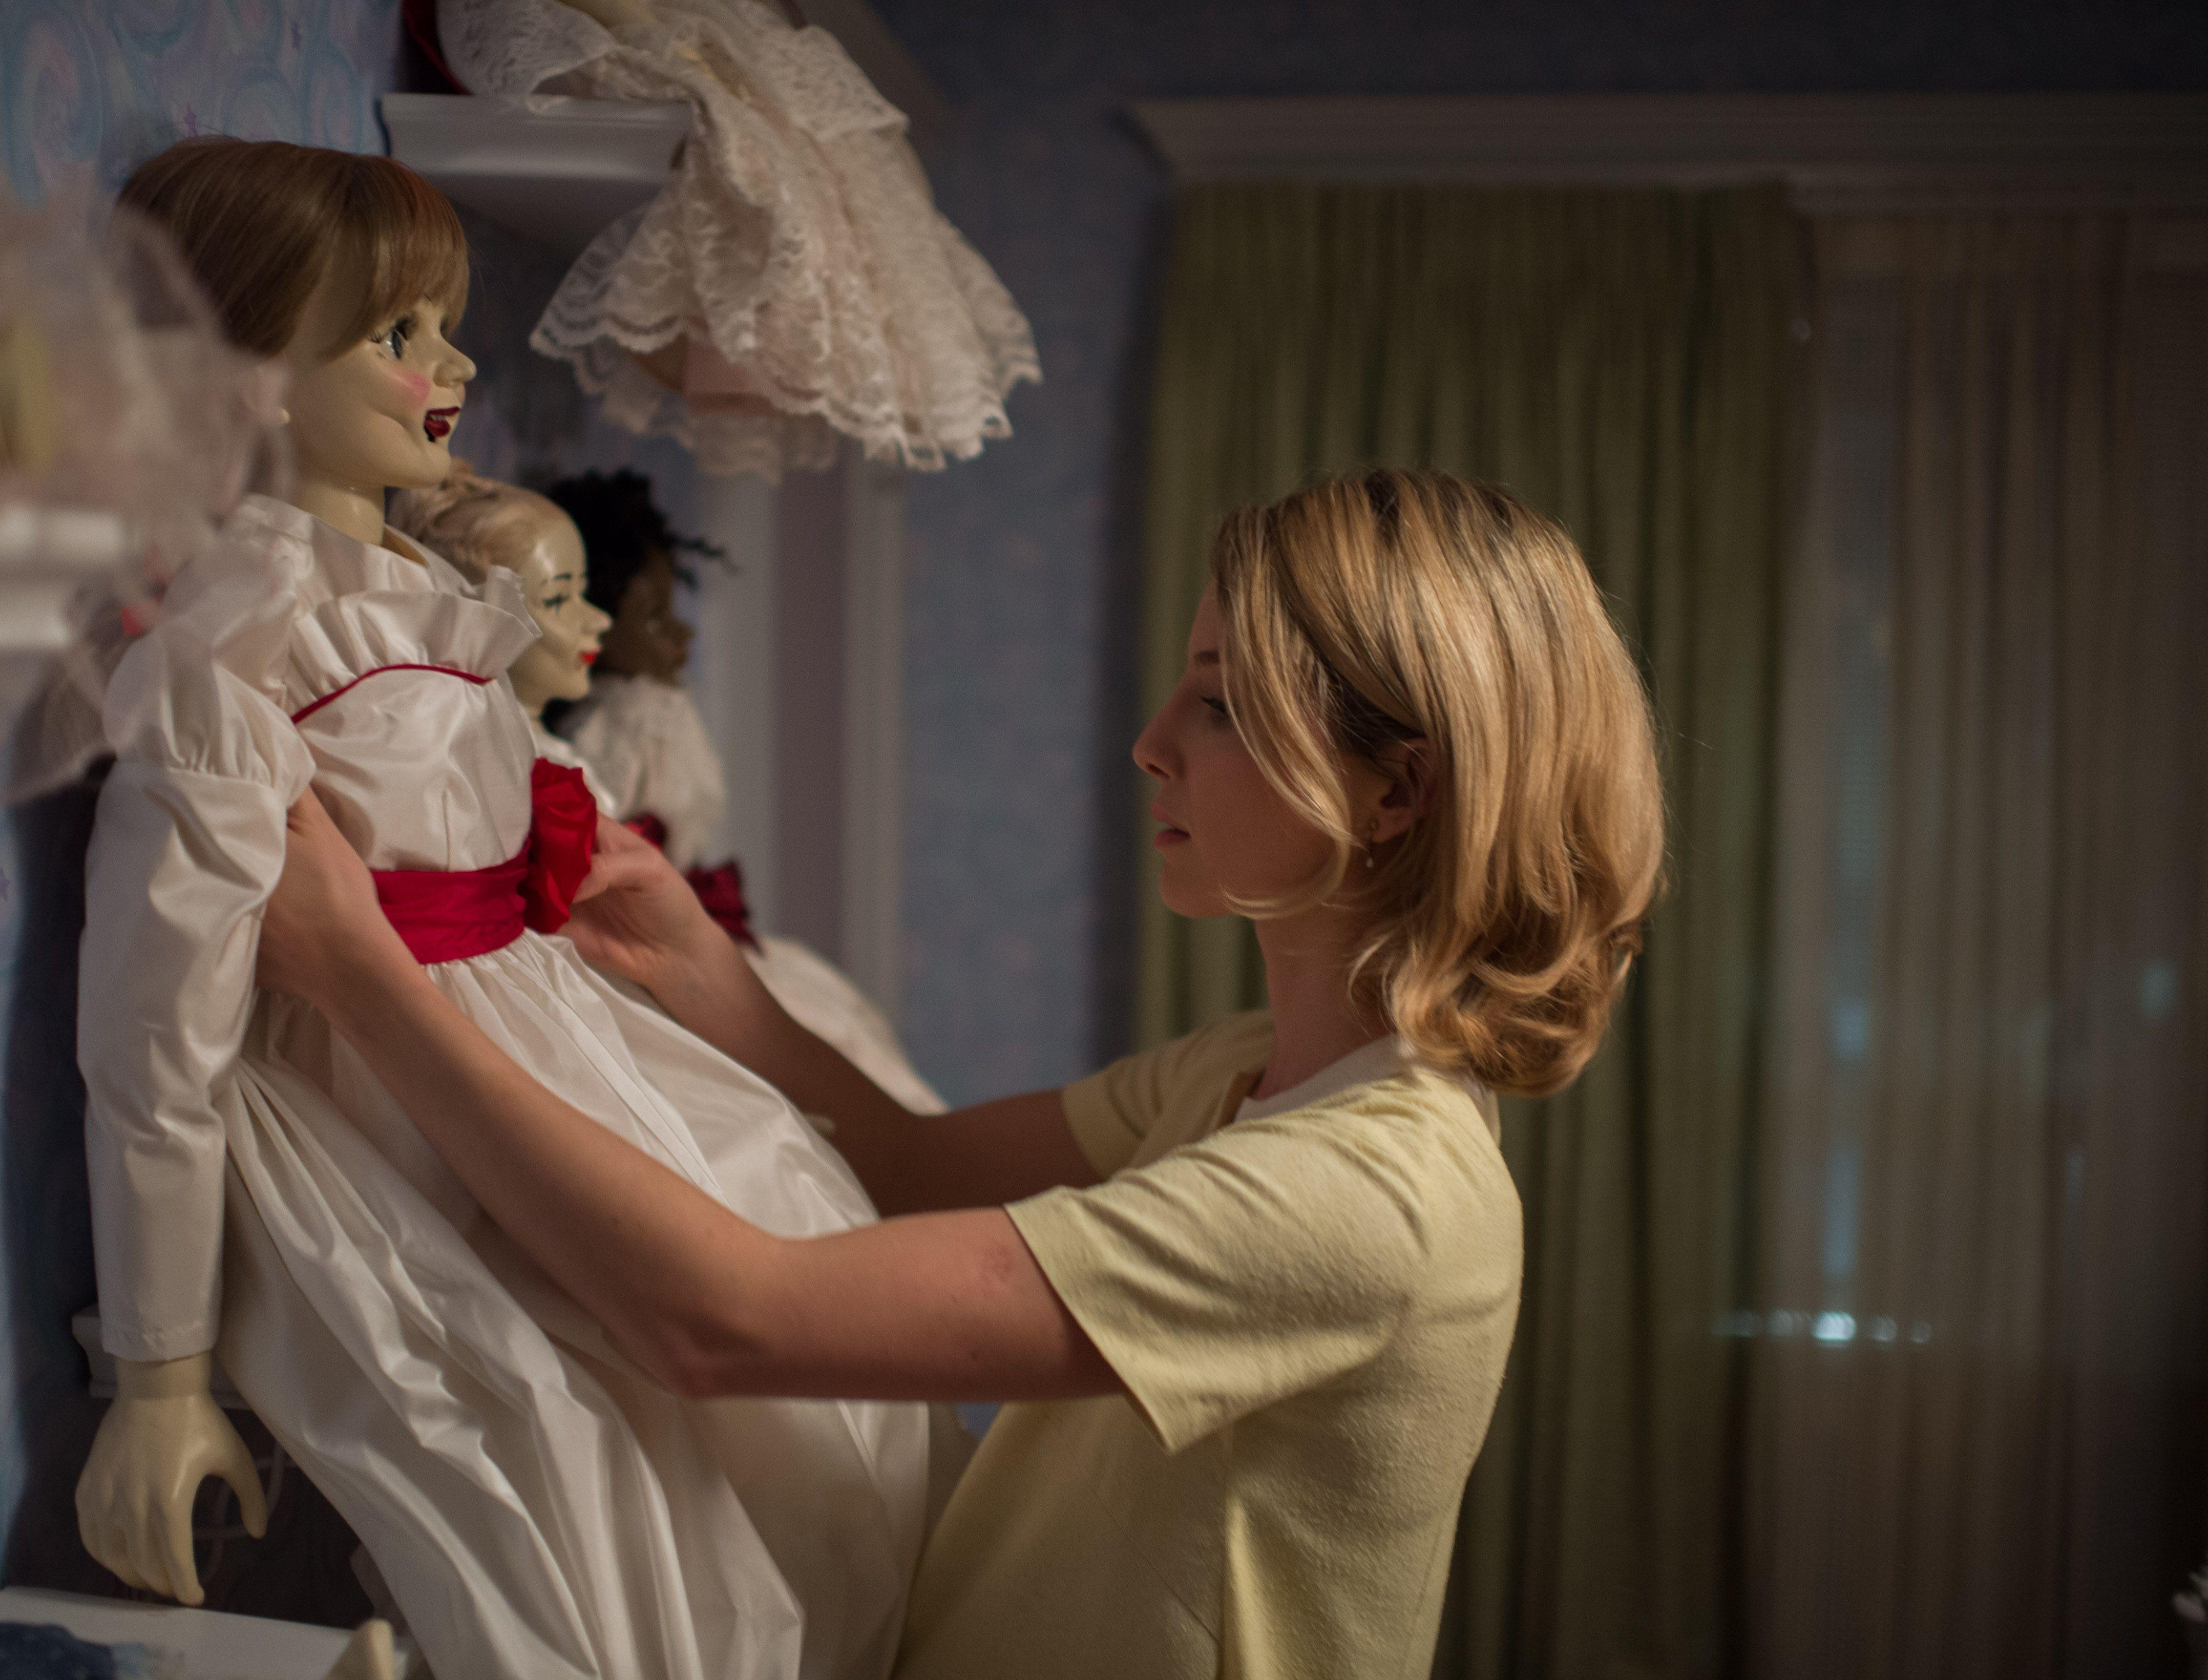 New Annabelle Movie Image Released to Creep out the Internet